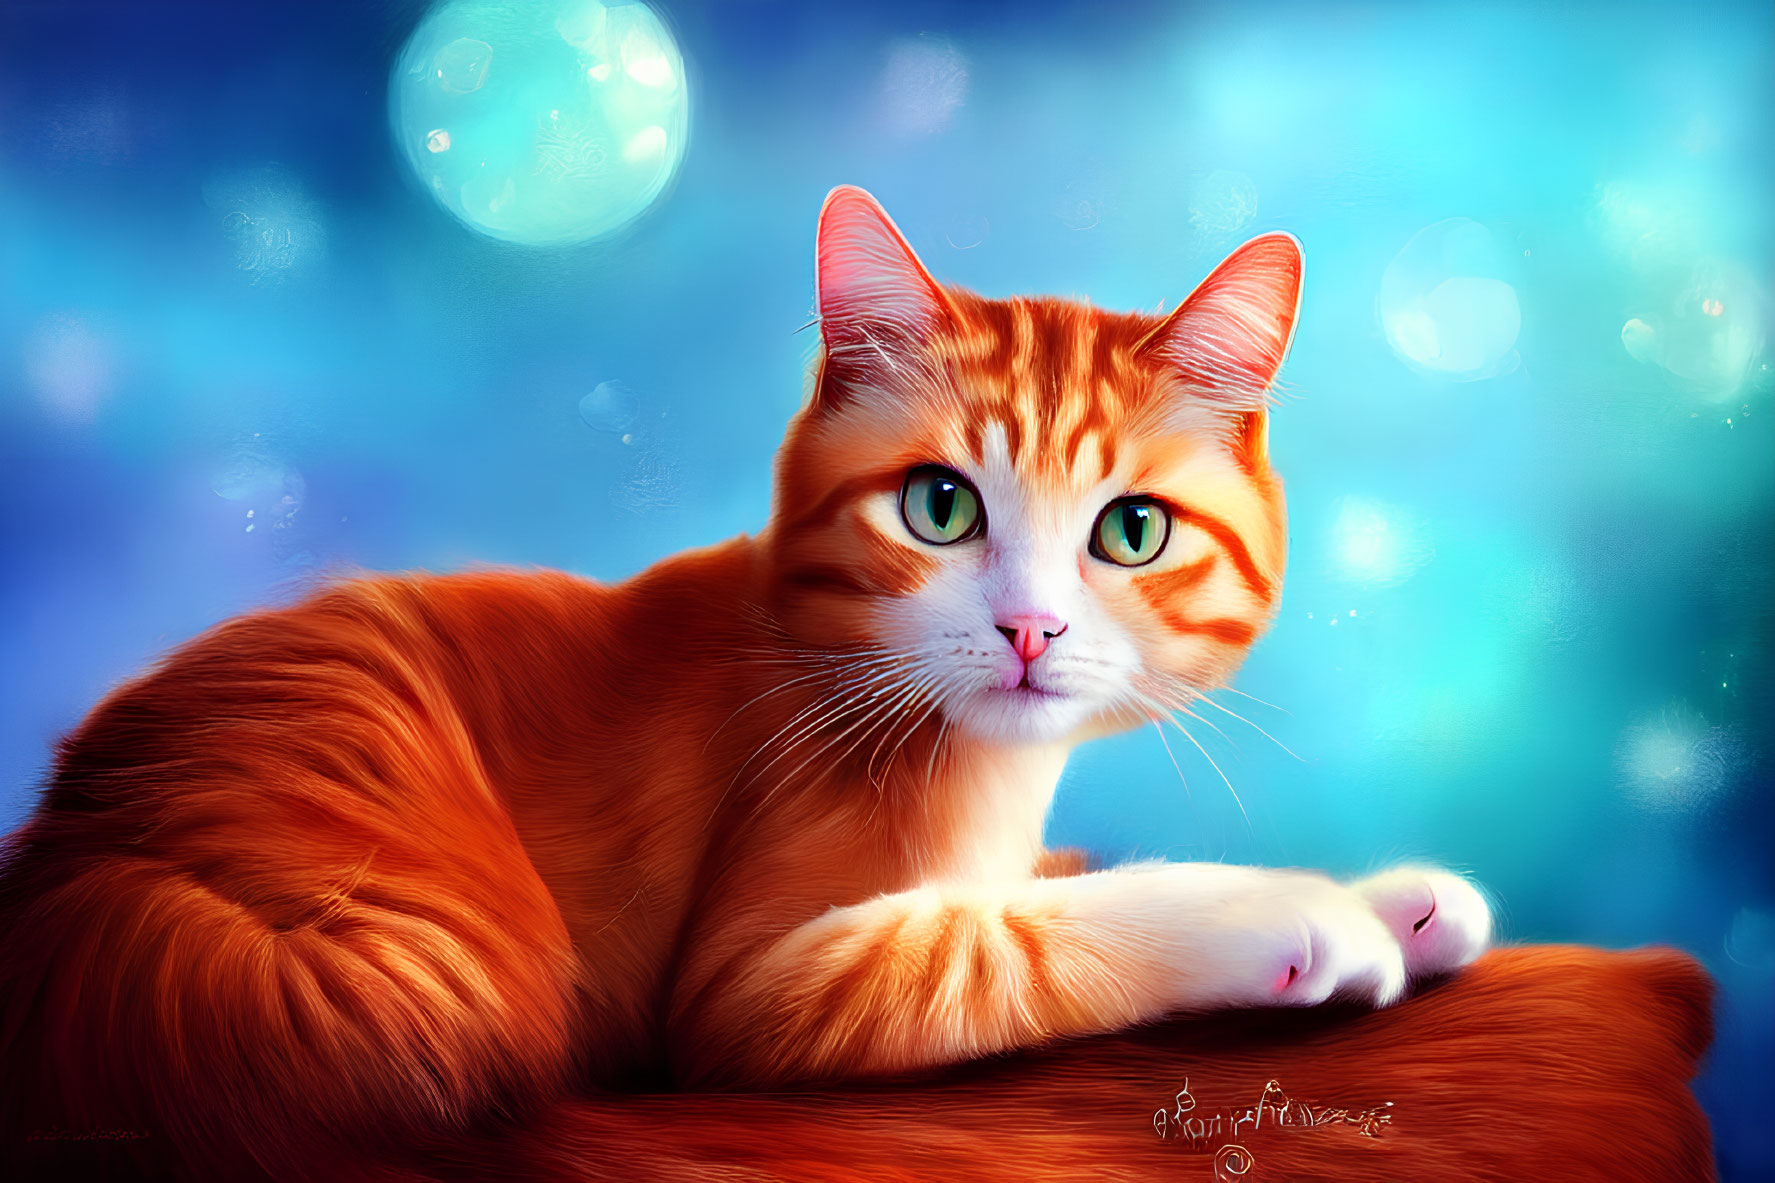 Orange Tabby Cat with Green Eyes on Vivid Blue Background with Bokeh and Glowing Orb